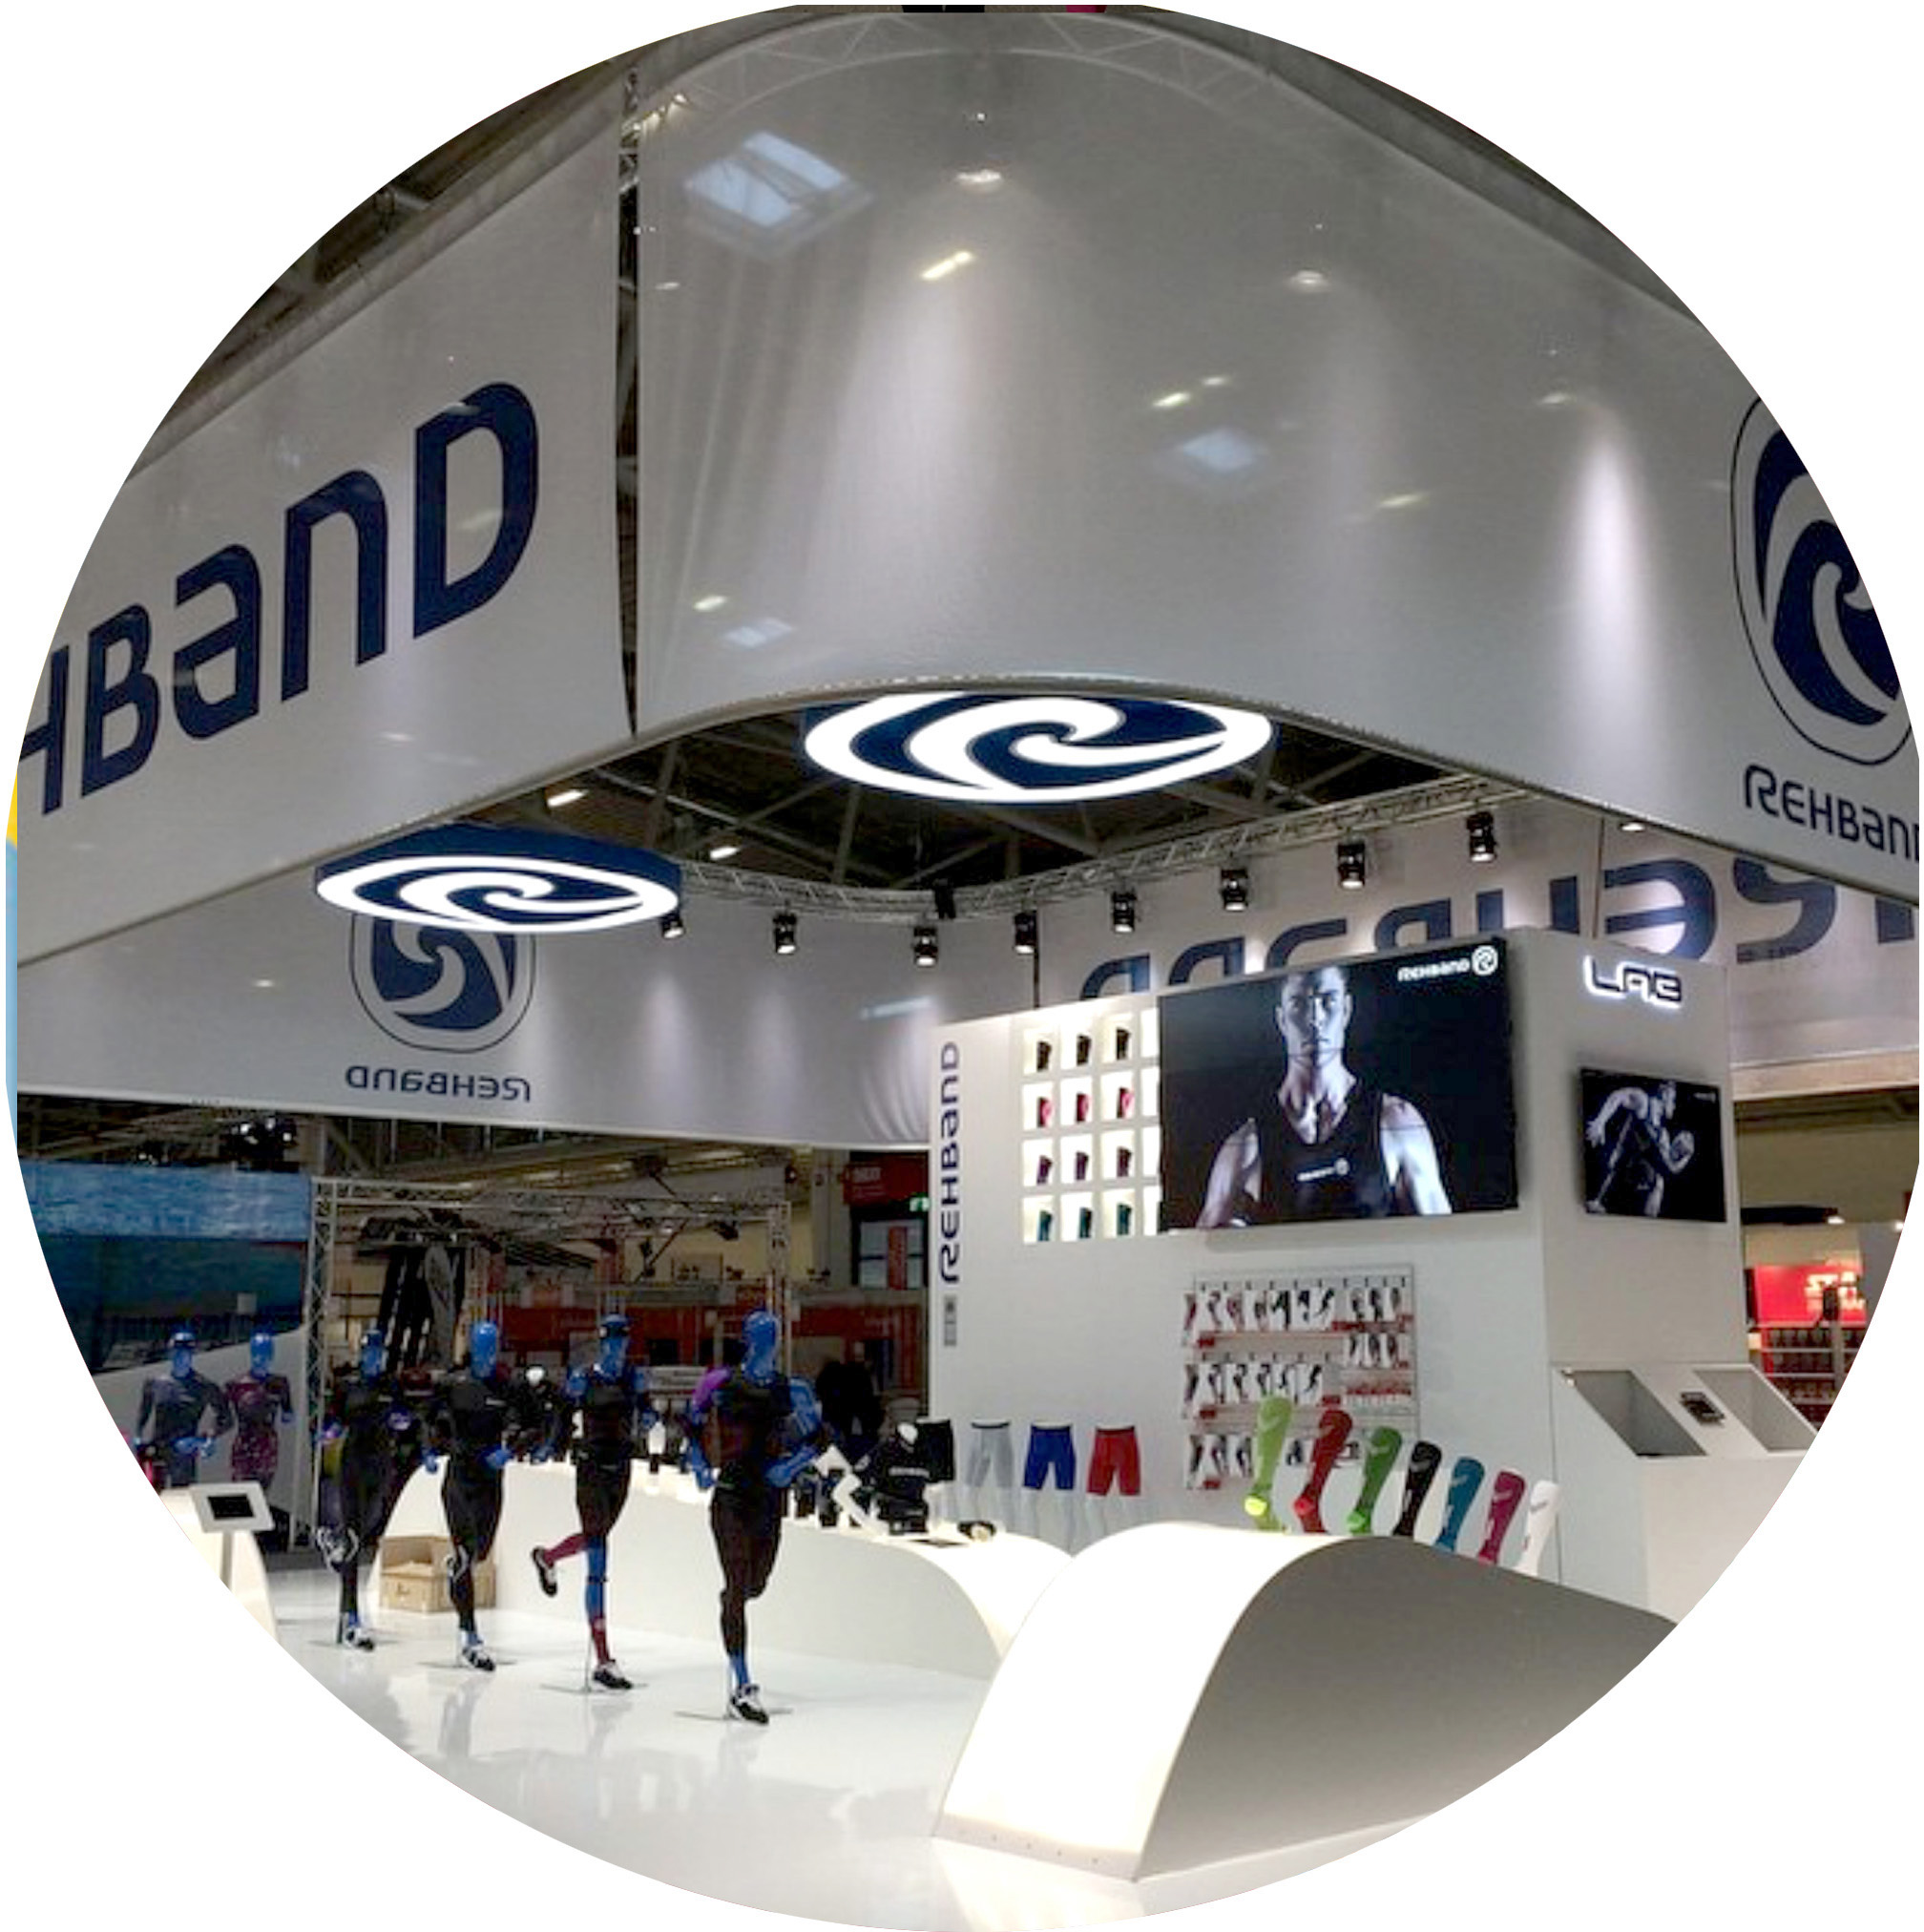 WINNER OF BEST DESIGNED BOOTH AT THE BIGGEST SPORT FAIR IN THE WORLD: ISPO IN MUNICH, FOR REHBAND.